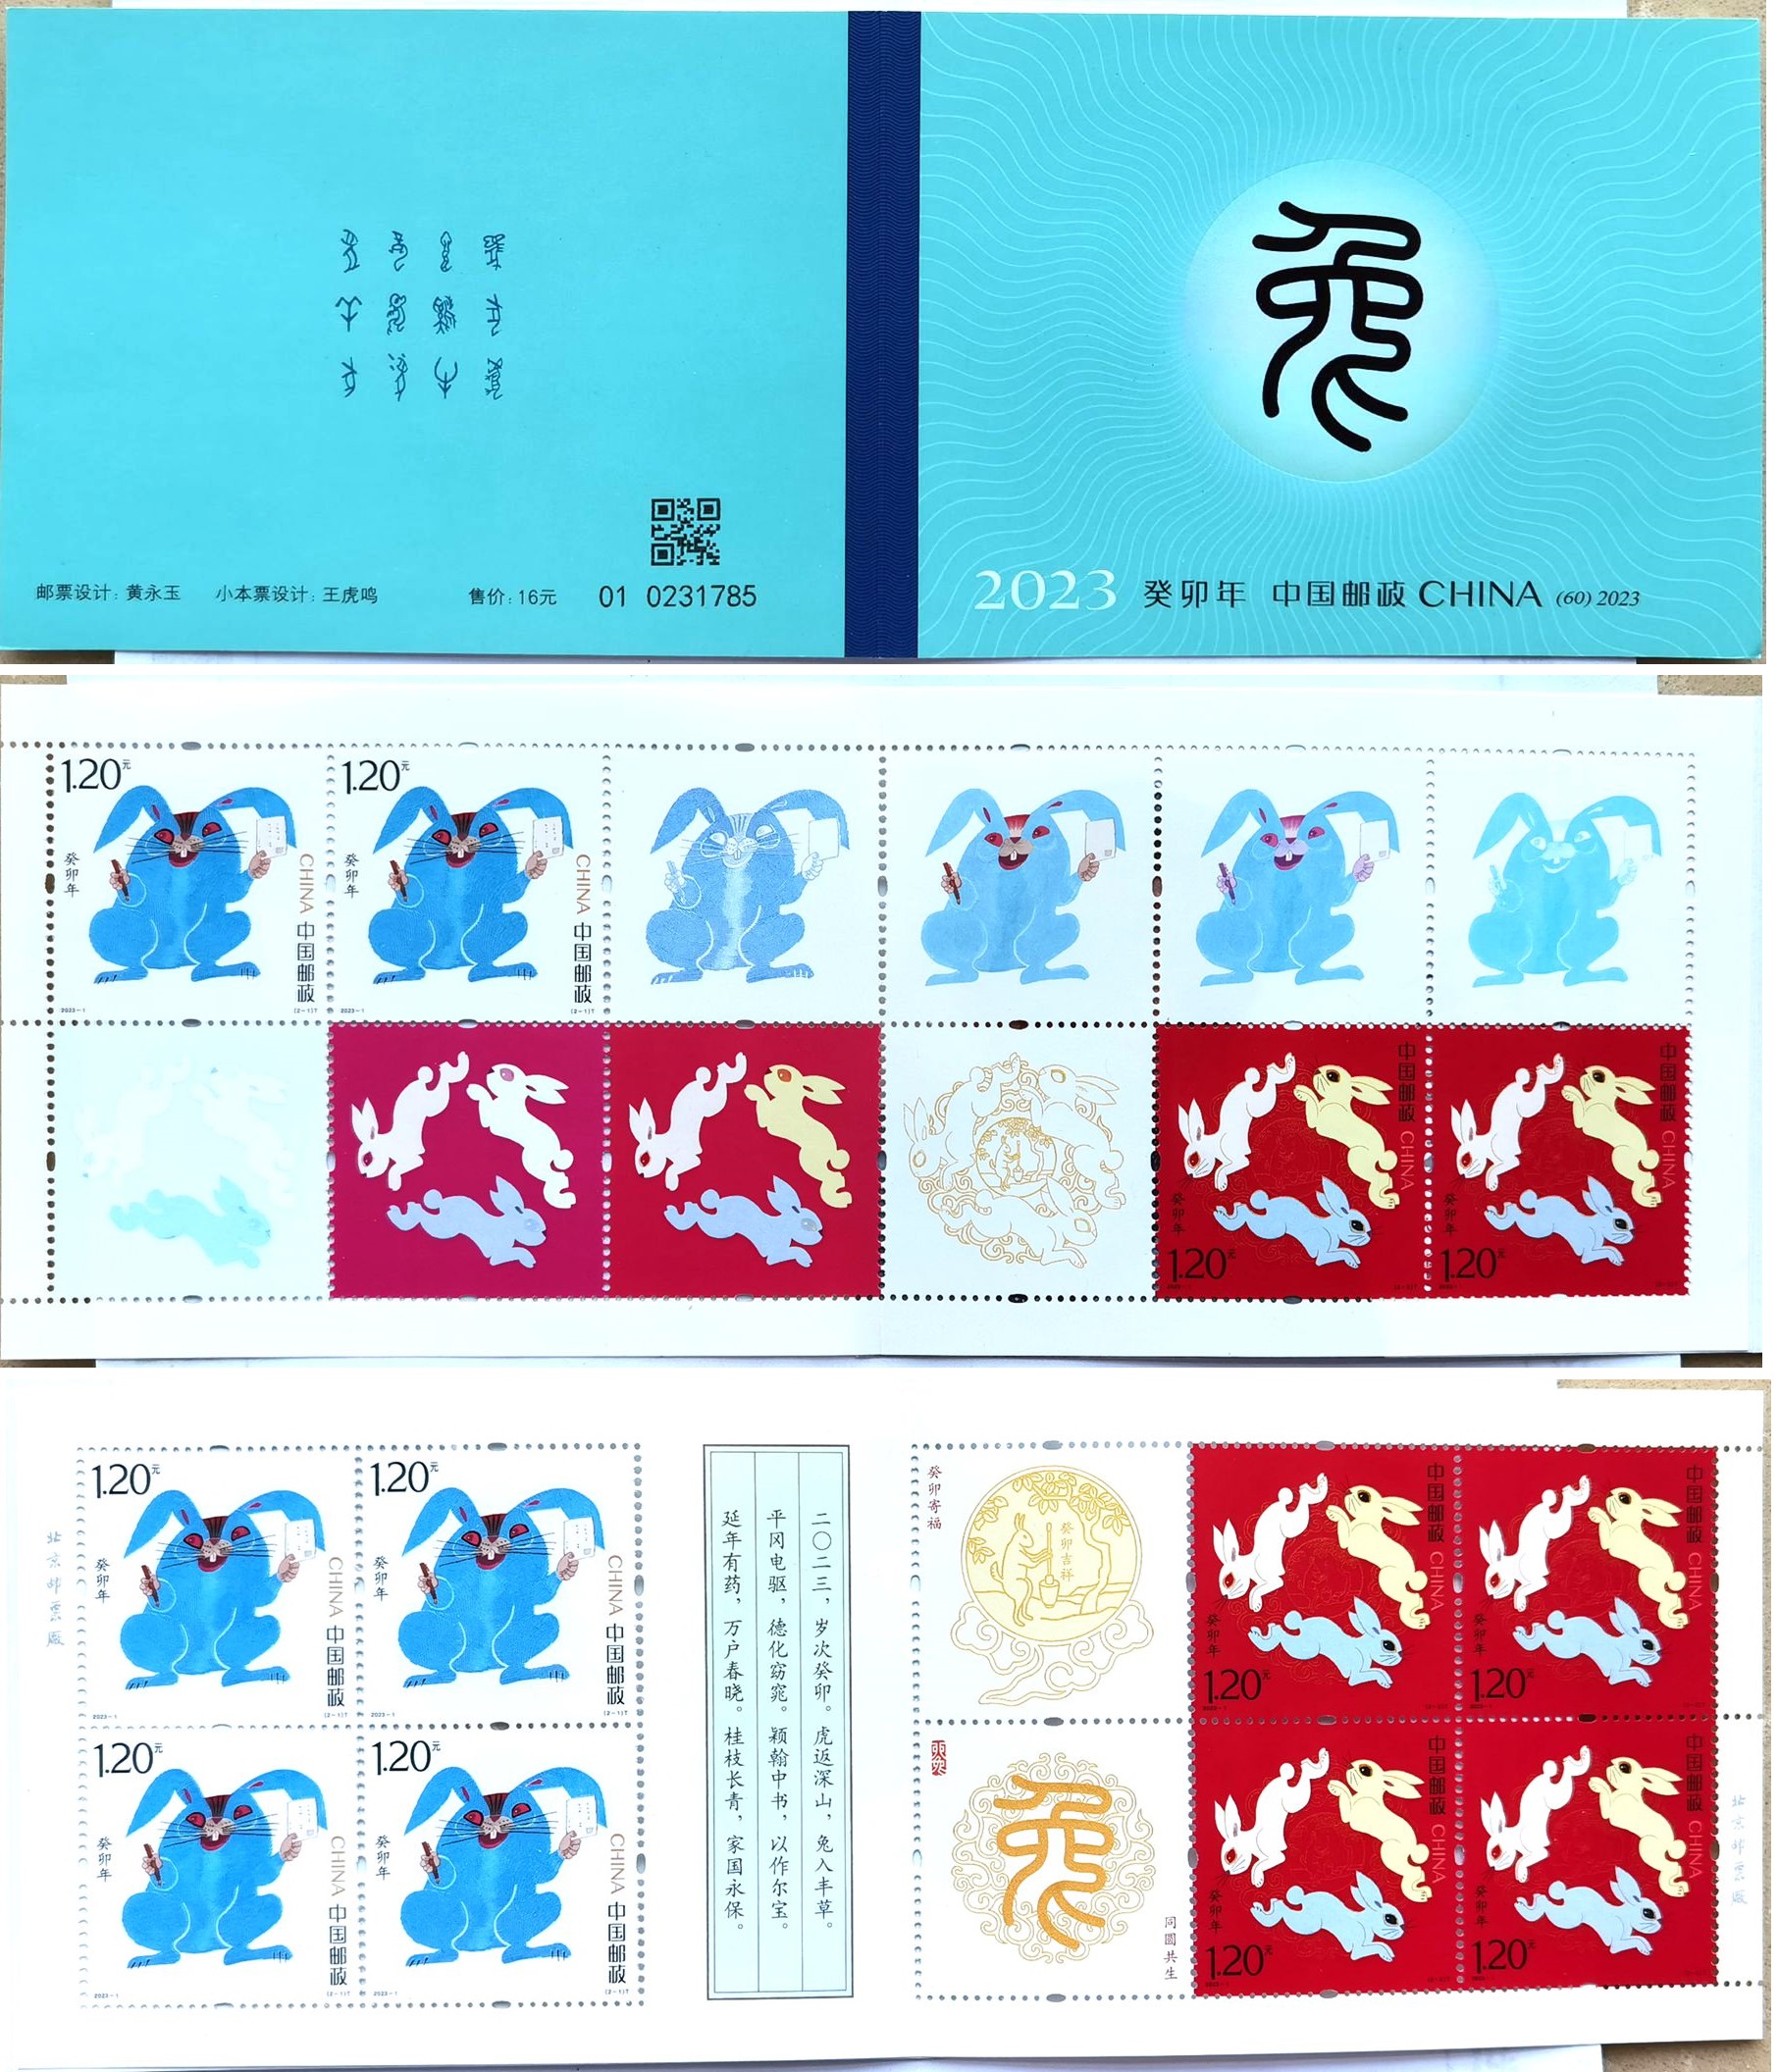 M2360, China Stamp Booklet, PRC 2023-1, Chinese Zodiac Rabbit Stamps